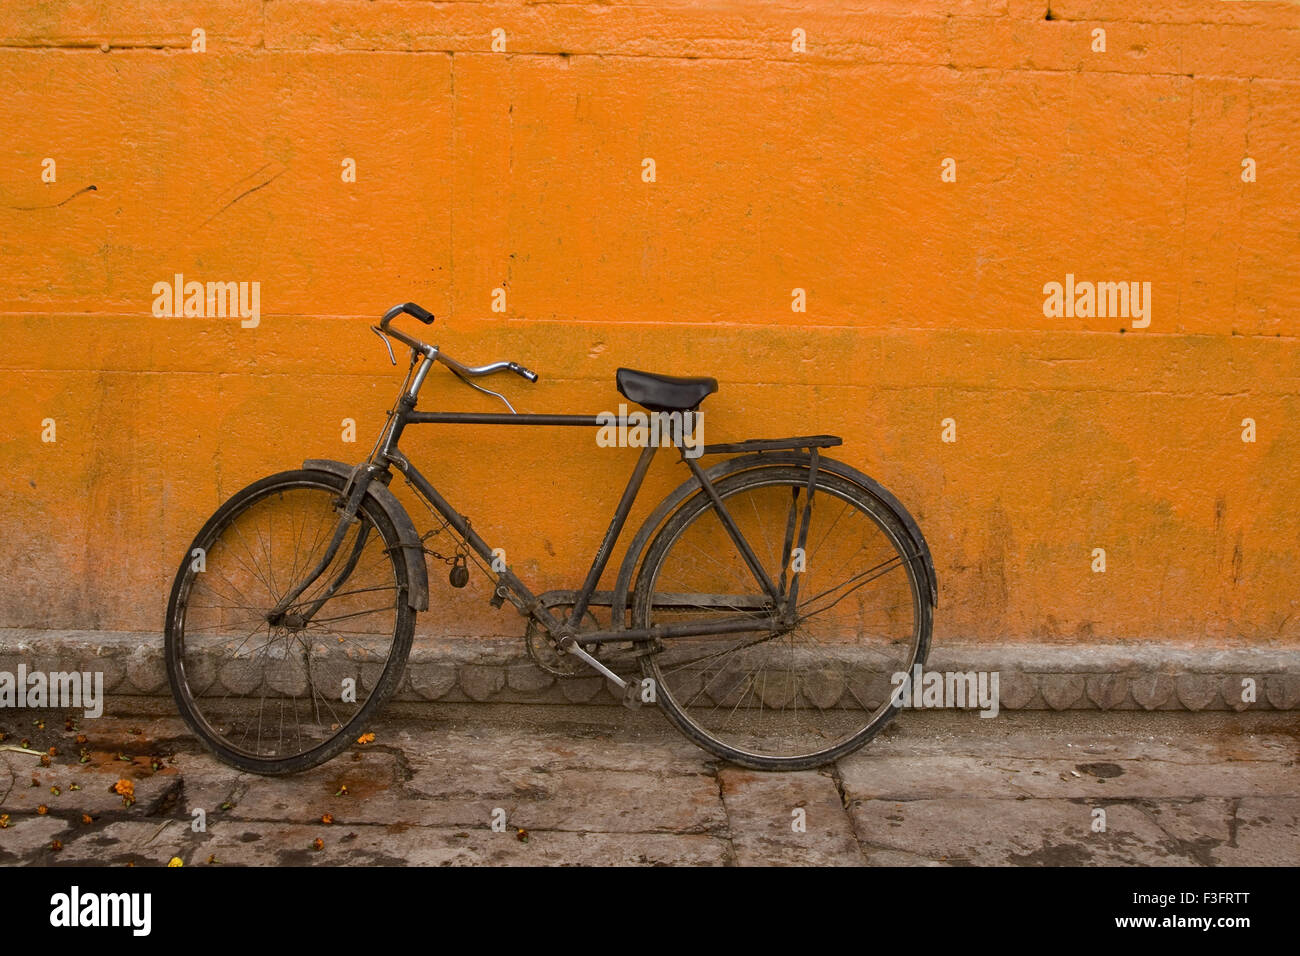 old bicycle parked against orange background wall ; India ; asia Stock Photo